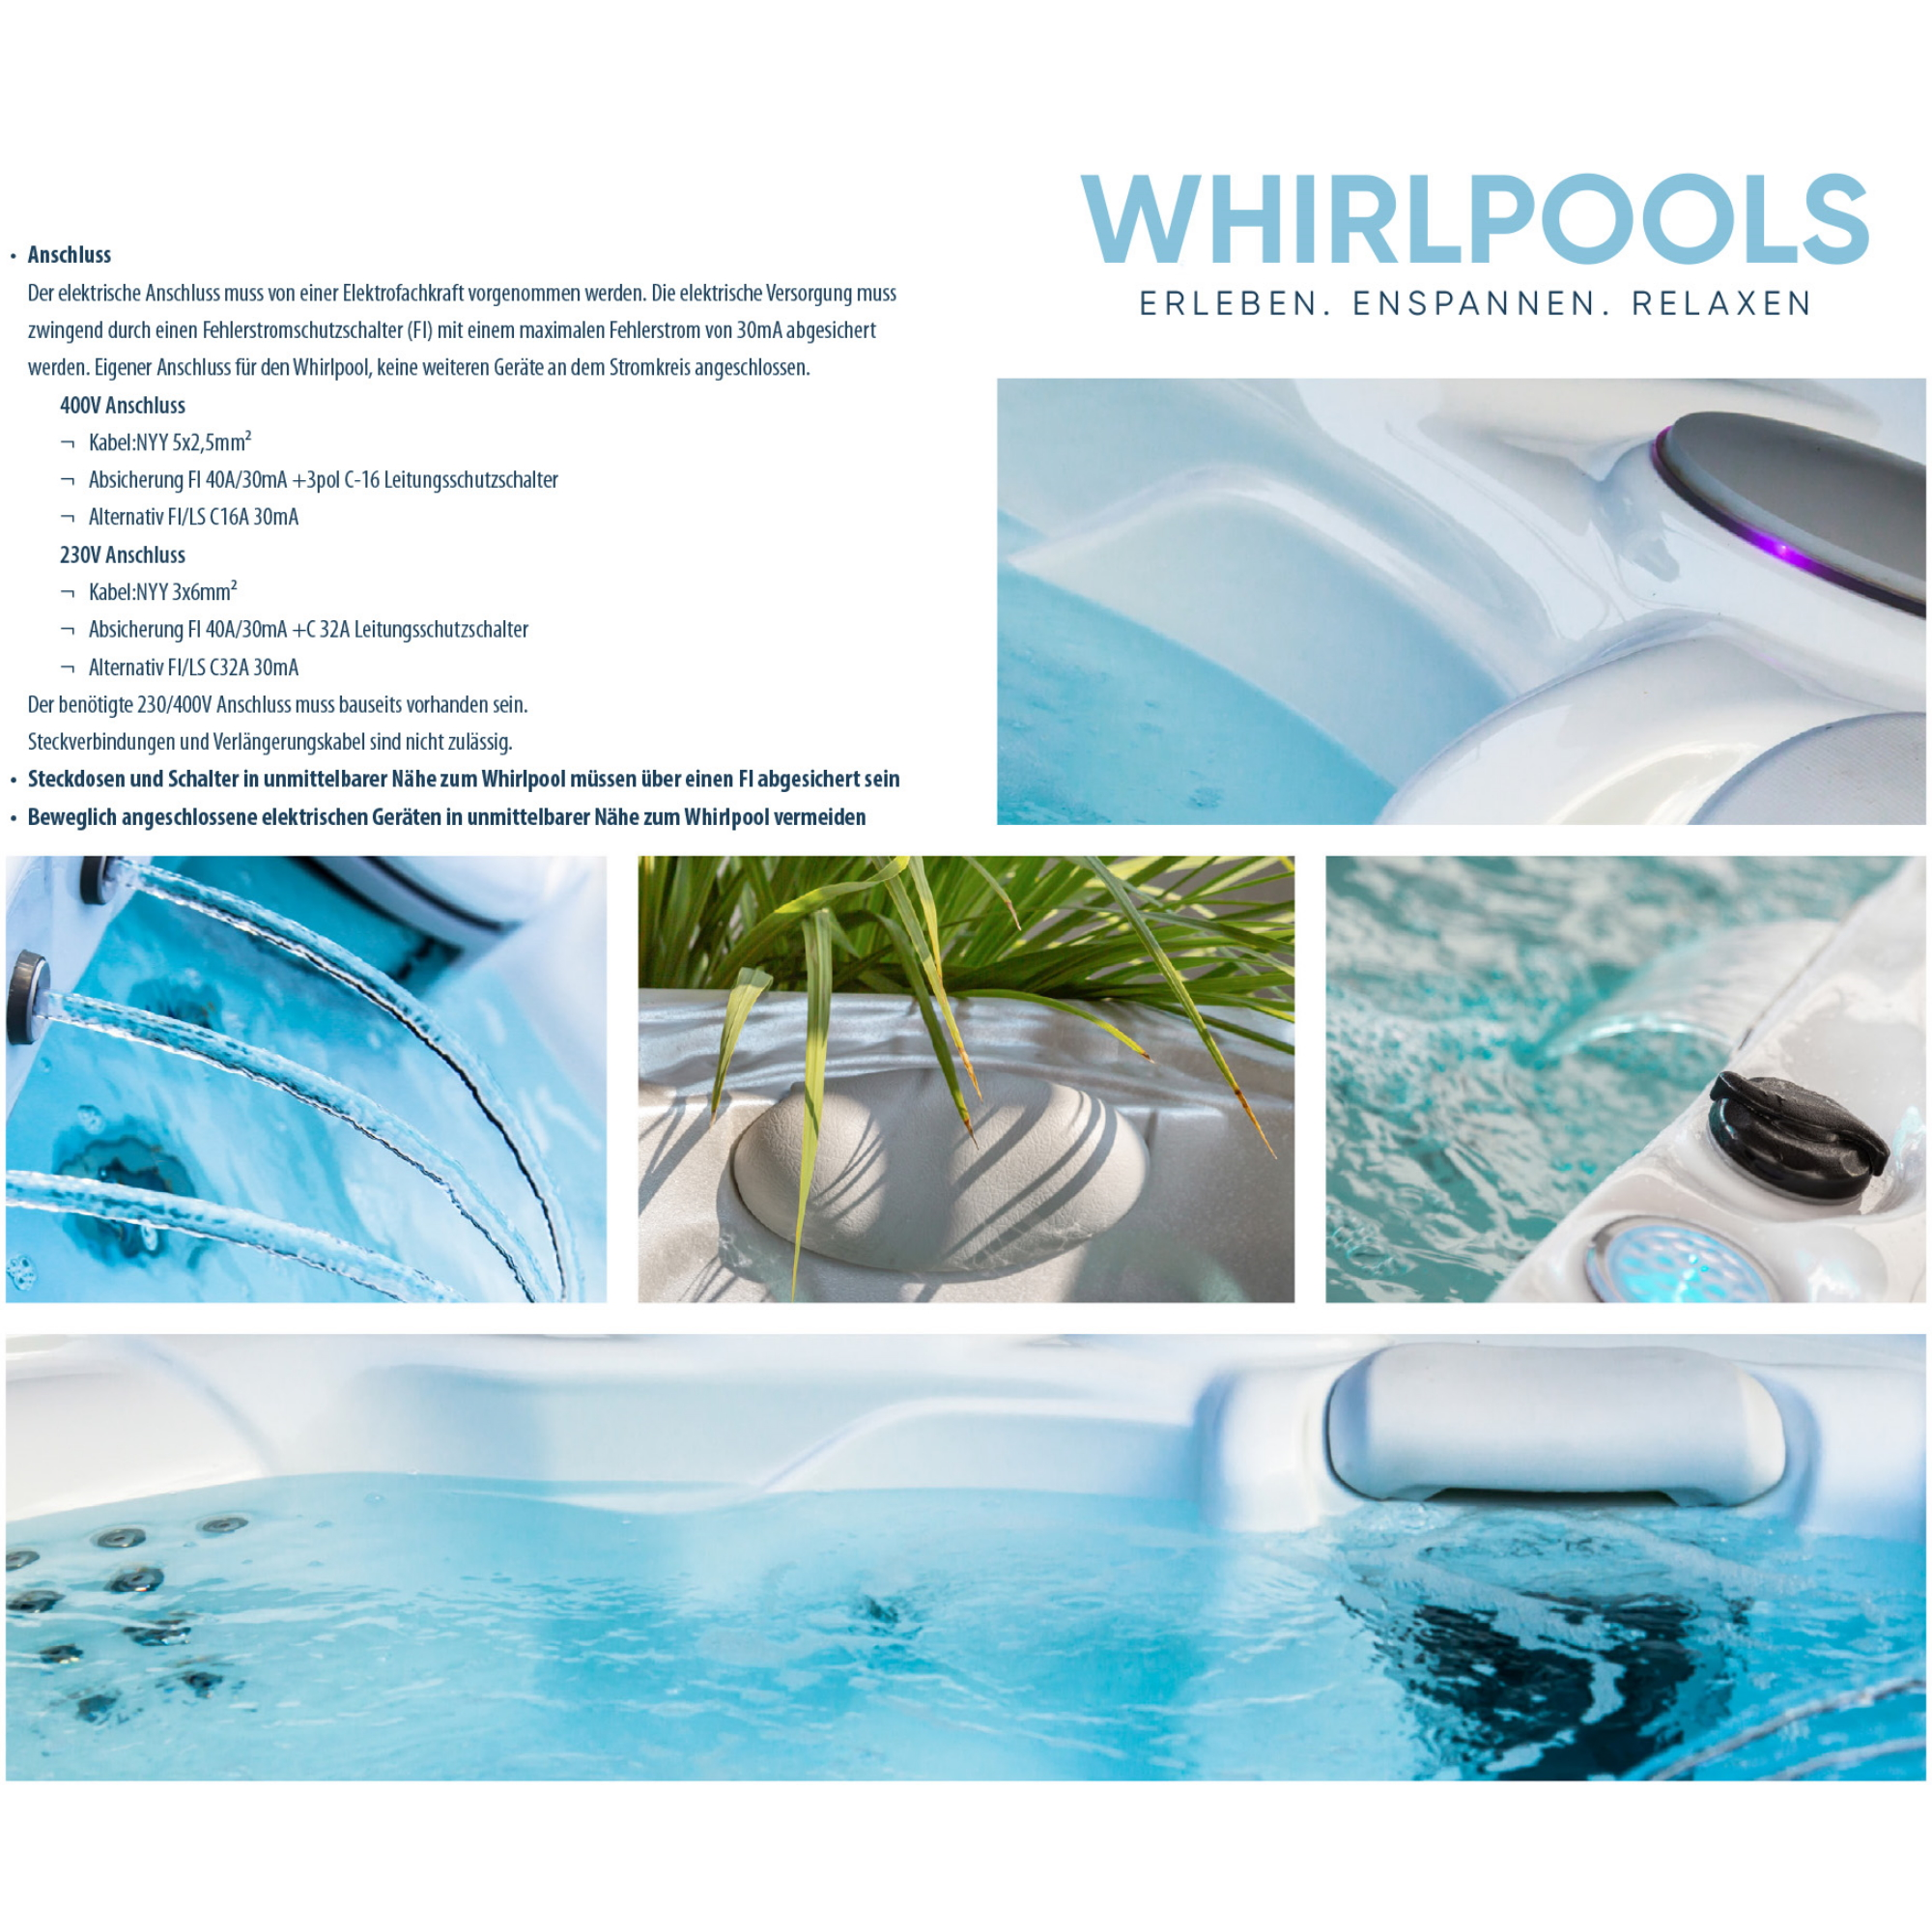 Whirlpool 'Fransisco' silbern 184 x 124 x 75 cm + product picture